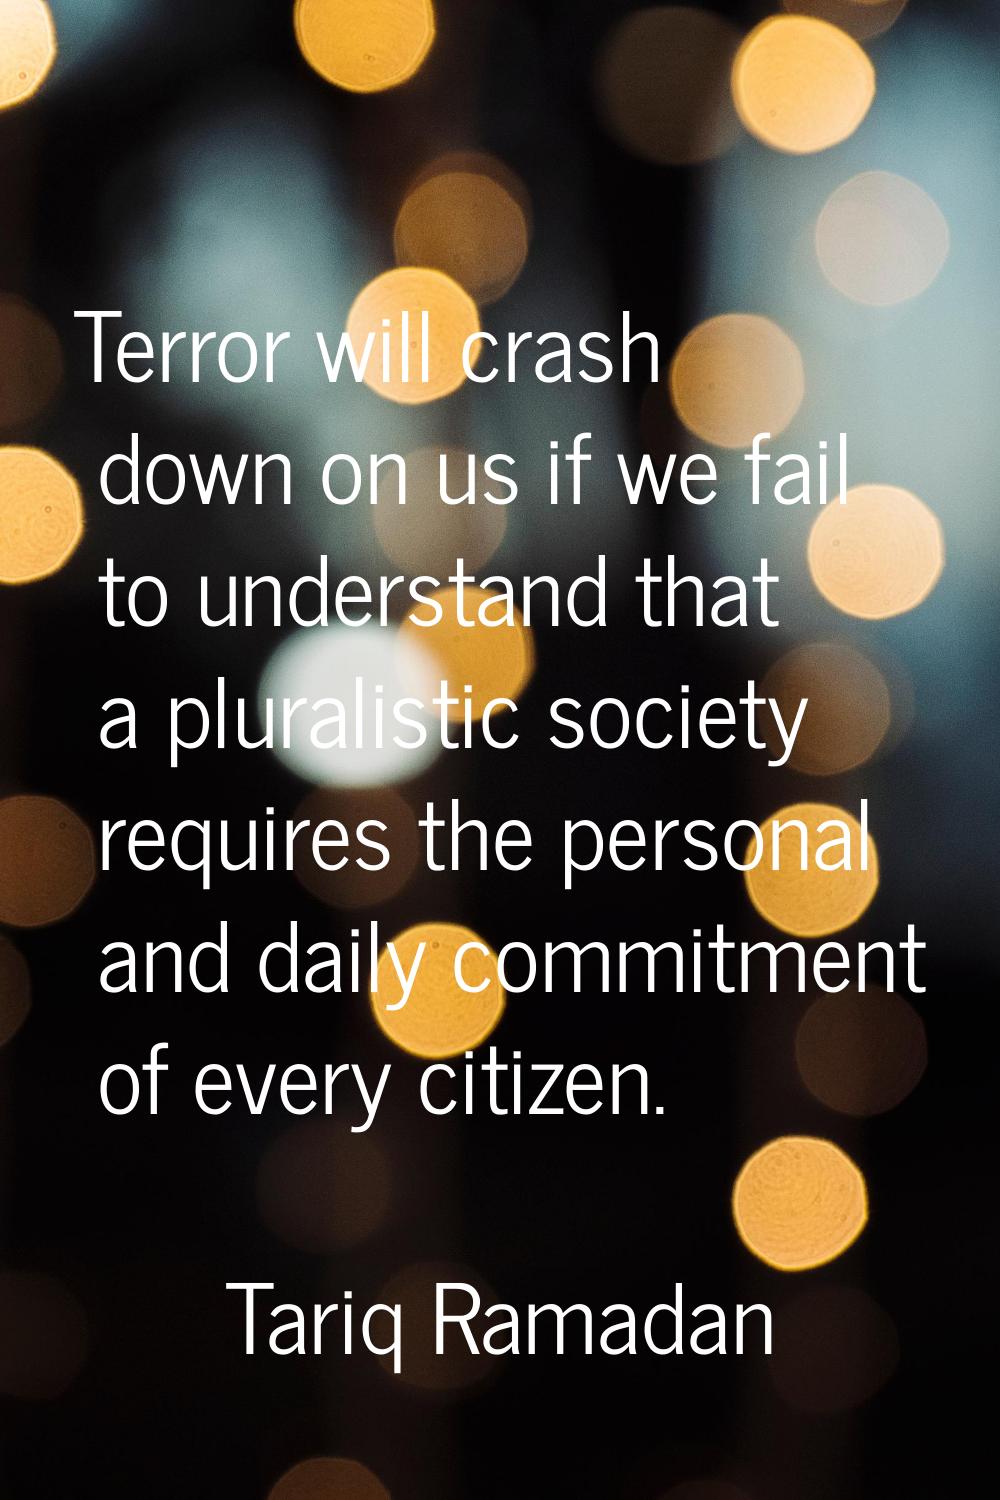 Terror will crash down on us if we fail to understand that a pluralistic society requires the perso